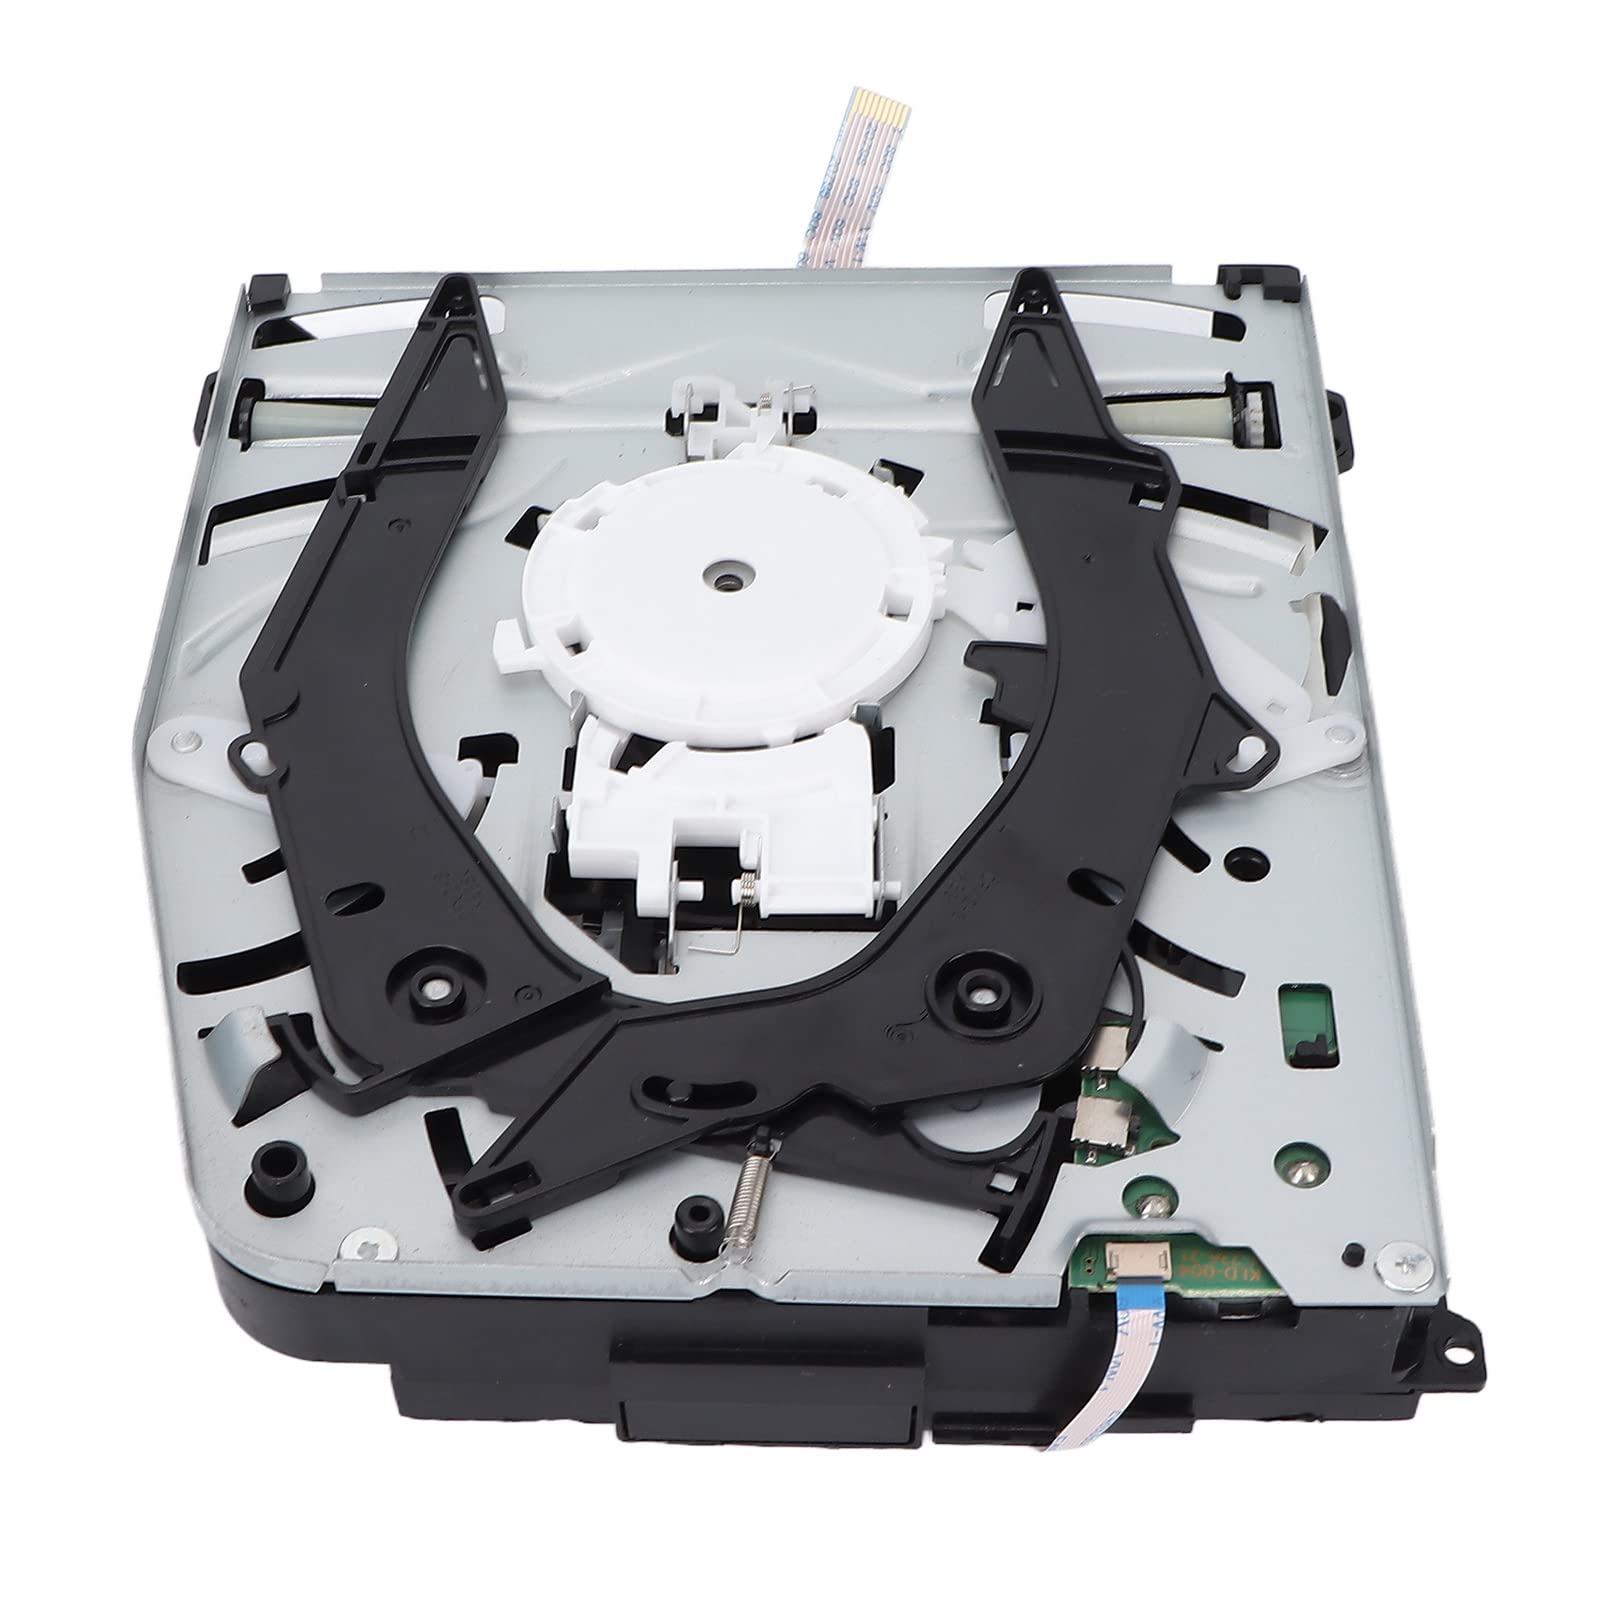 Remove the cover of your PS4 console.
Take out the old hard drive and replace it with the new one.